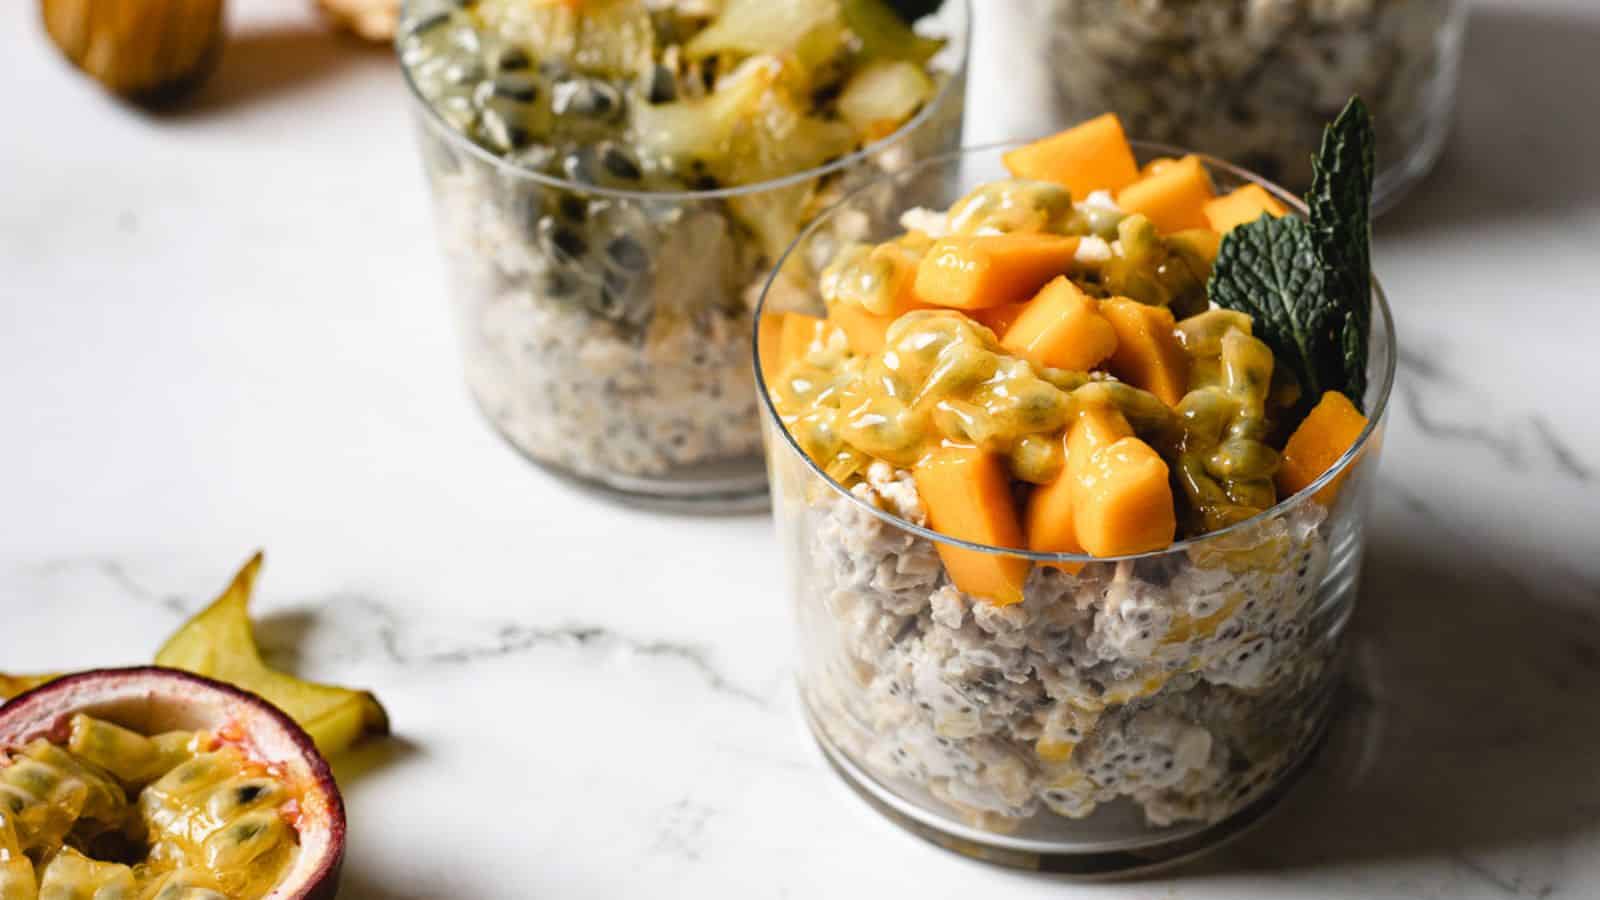 <p>Transport yourself to a tropical paradise effortlessly with Tropical Sunrise Overnight Oats. Assemble the ingredients before bedtime, and wake up to a bowl of island-inspired goodness. It’s the lazy person’s ticket to a hassle-free breakfast.<br><strong>Get the Recipe: </strong><a href="https://immigrantstable.com/tropical-vegan-overnight-oats-gluten-free/?utm_source=msn&utm_medium=page&utm_campaign=18 extremely quick and easy breakfast ideas for lazy people">Tropical Sunrise Overnight Oats</a></p>